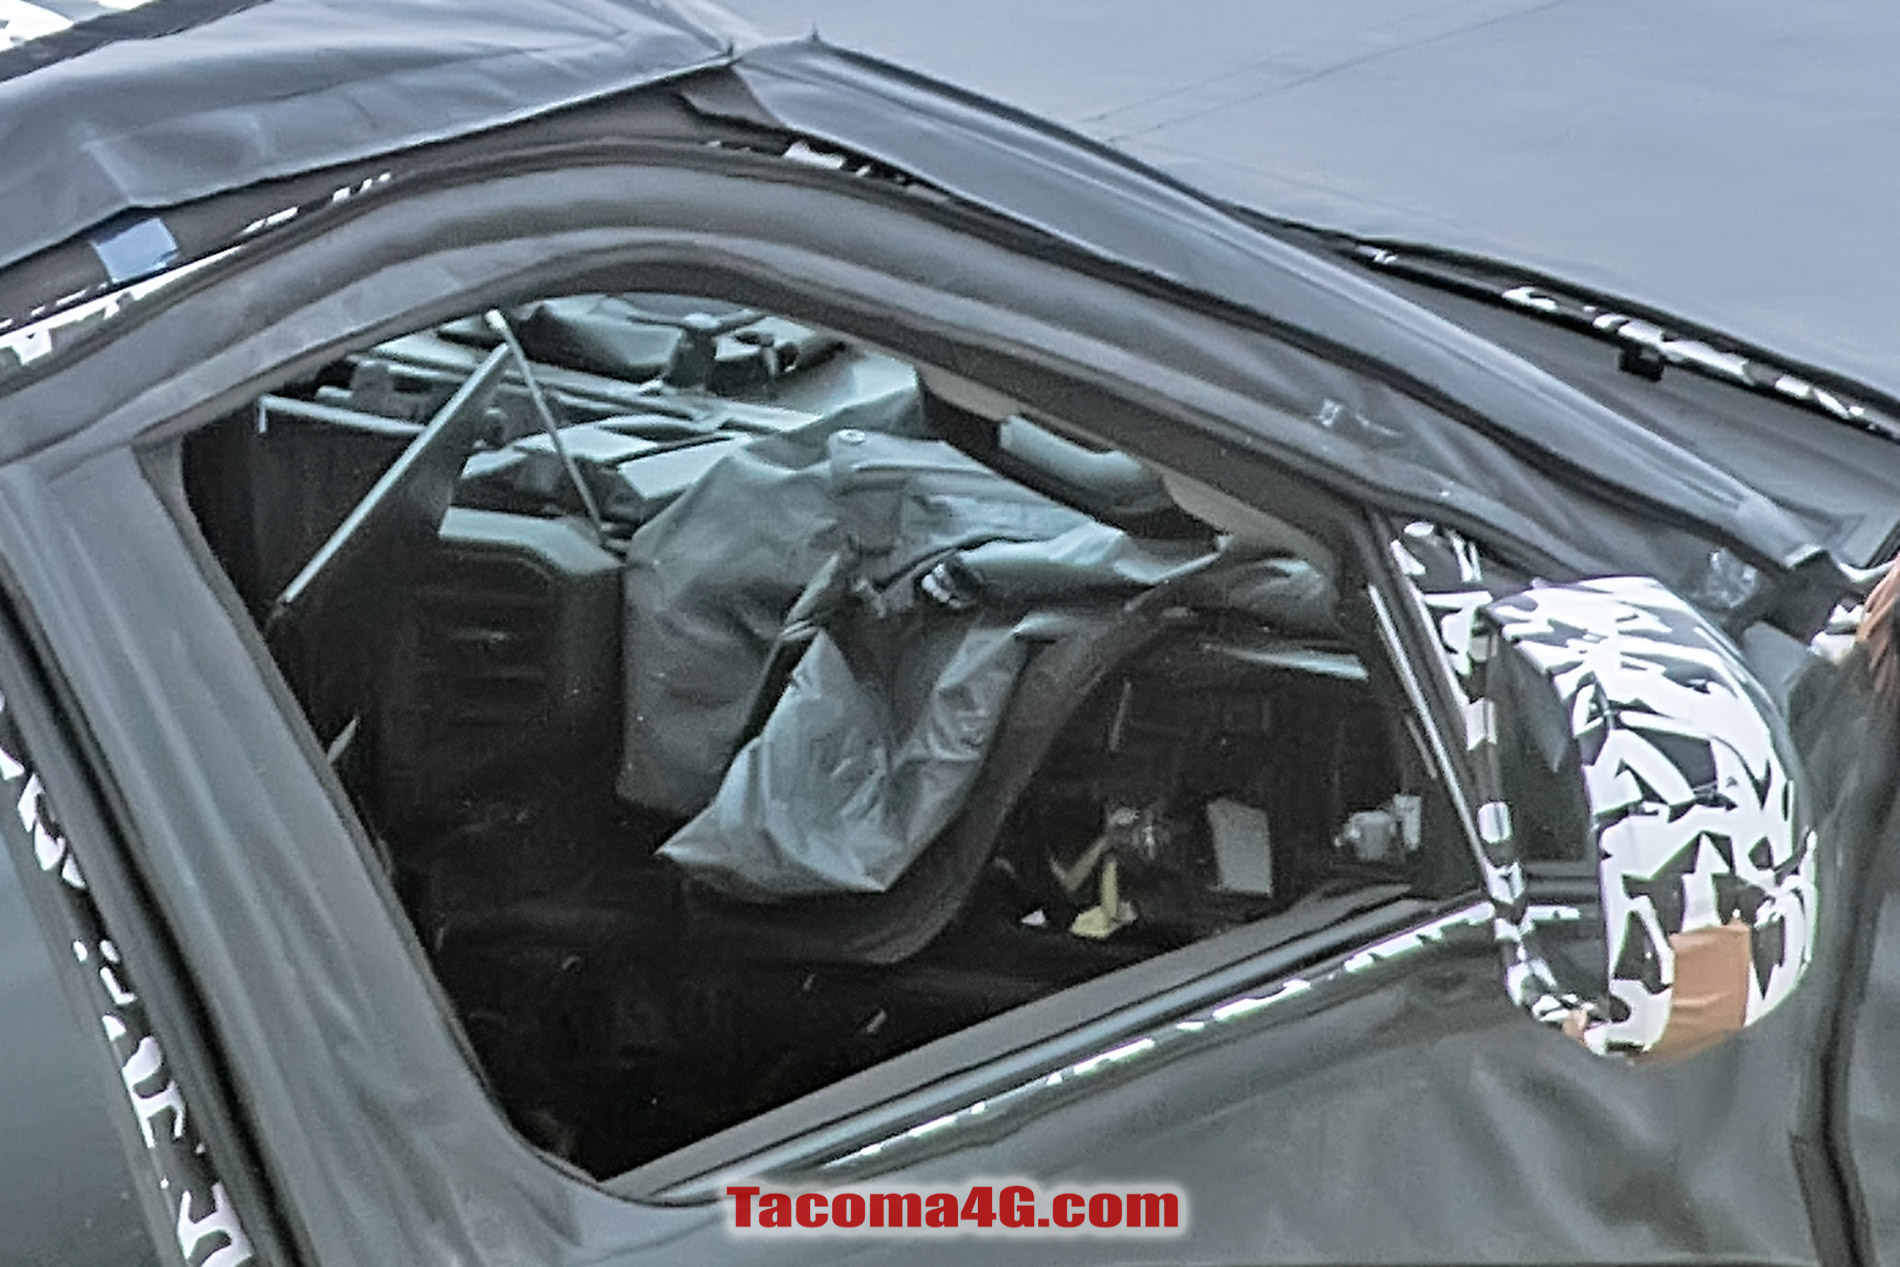 2024 Tacoma New 2024 Tacoma (4th Next Gen) Mule Off-Road Testing Reveals More Suspension Details -- 5/27/22 2024 Toyota Tacoma 4th gen spy photos suspension interior 8